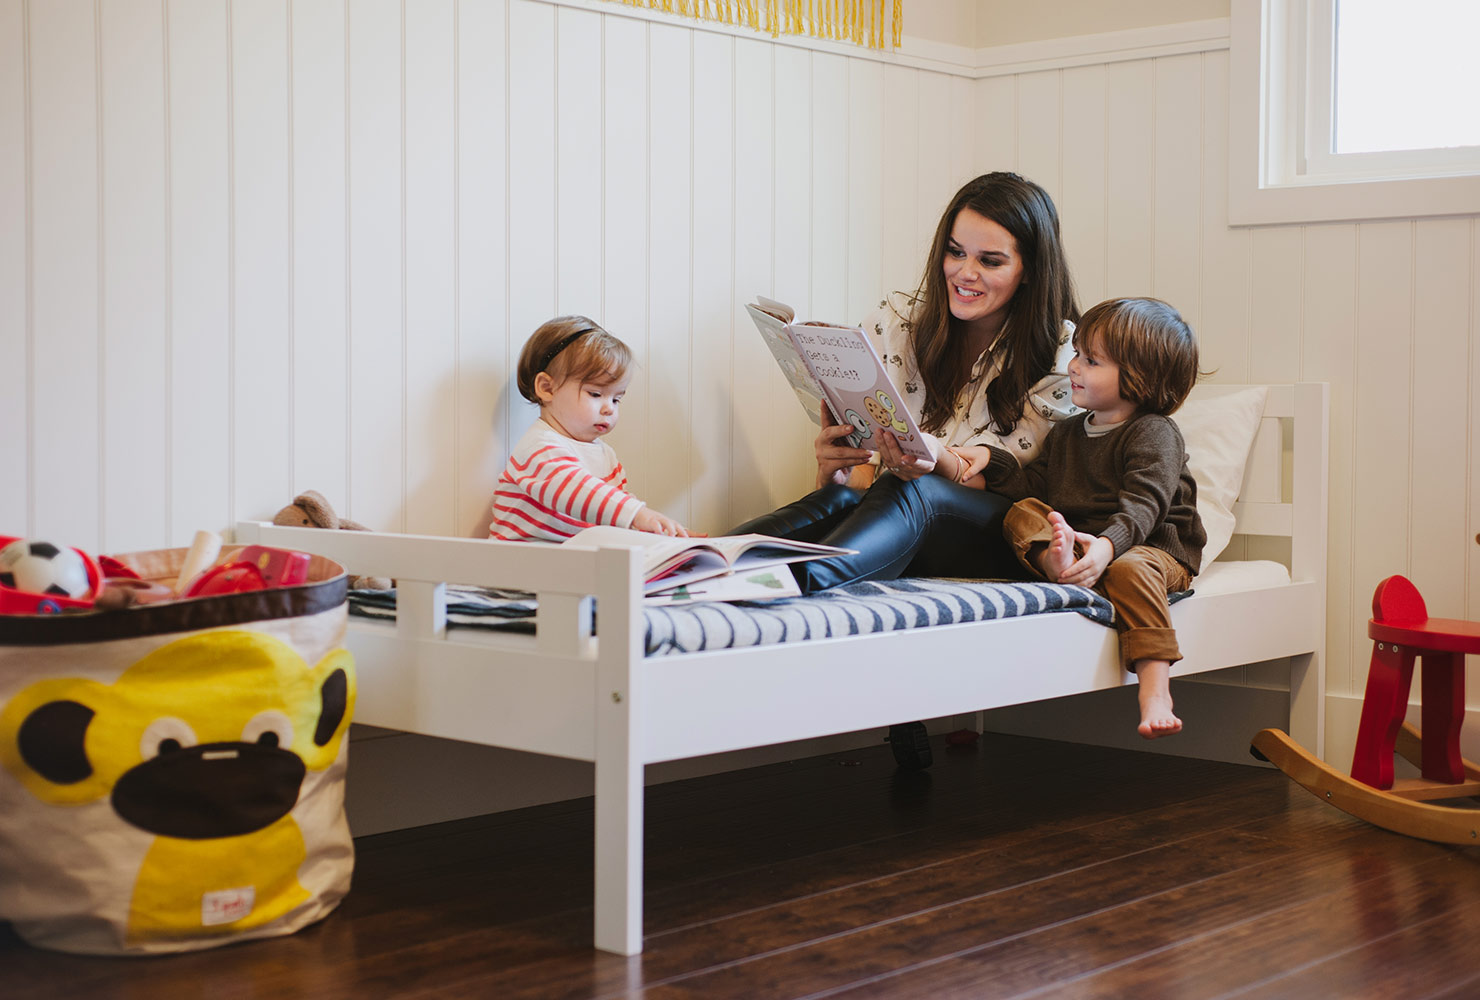 sibling photo ideas mother reading to children